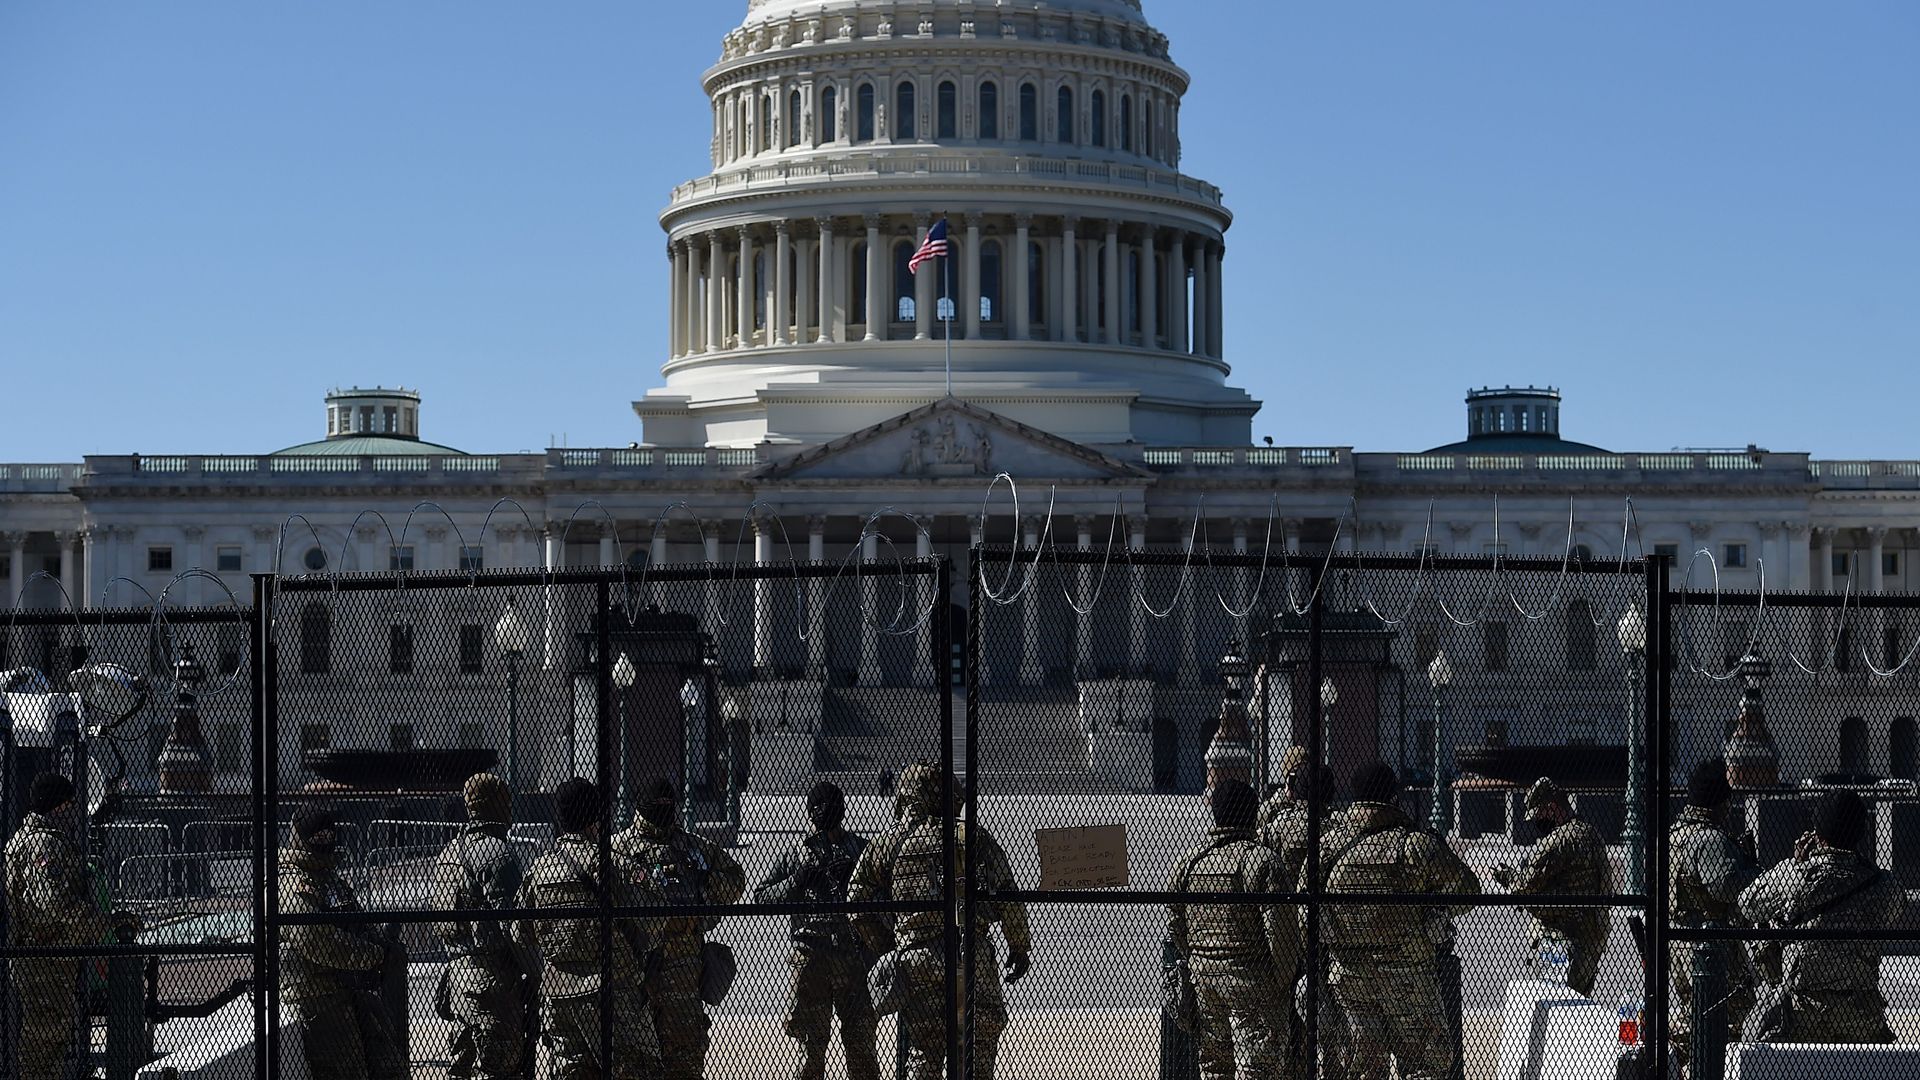 Members of the National Guard watch a checkpoint on Capitol Hill on March 5, 2021, in Washington, DC